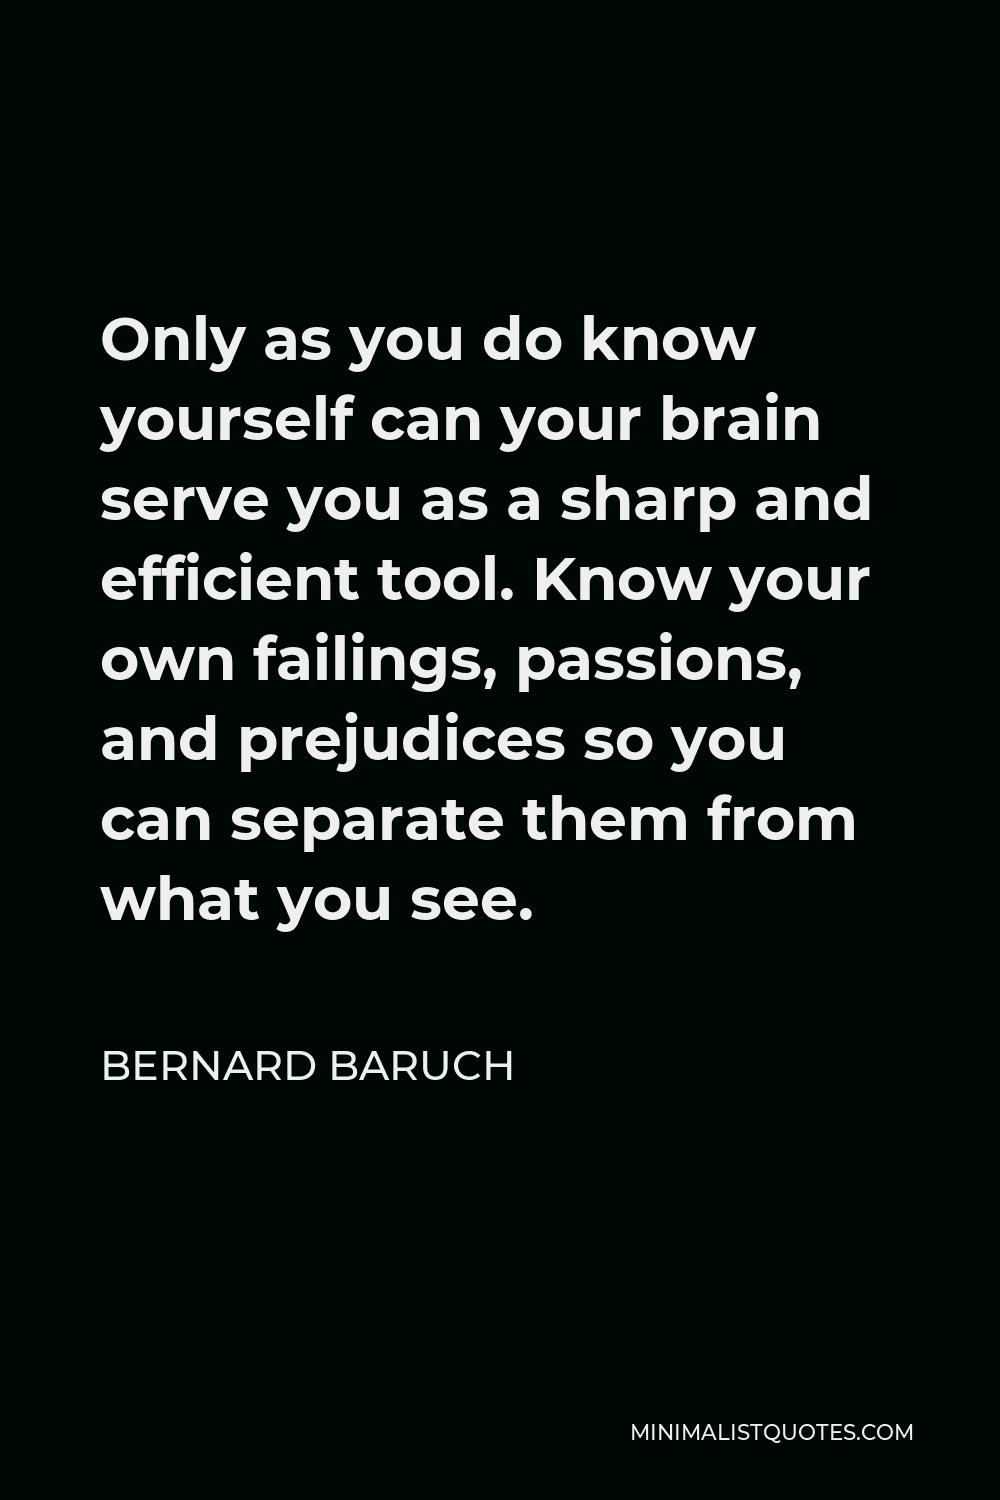 Bernard Baruch Quote - Only as you do know yourself can your brain serve you as a sharp and efficient tool. Know your own failings, passions, and prejudices so you can separate them from what you see.